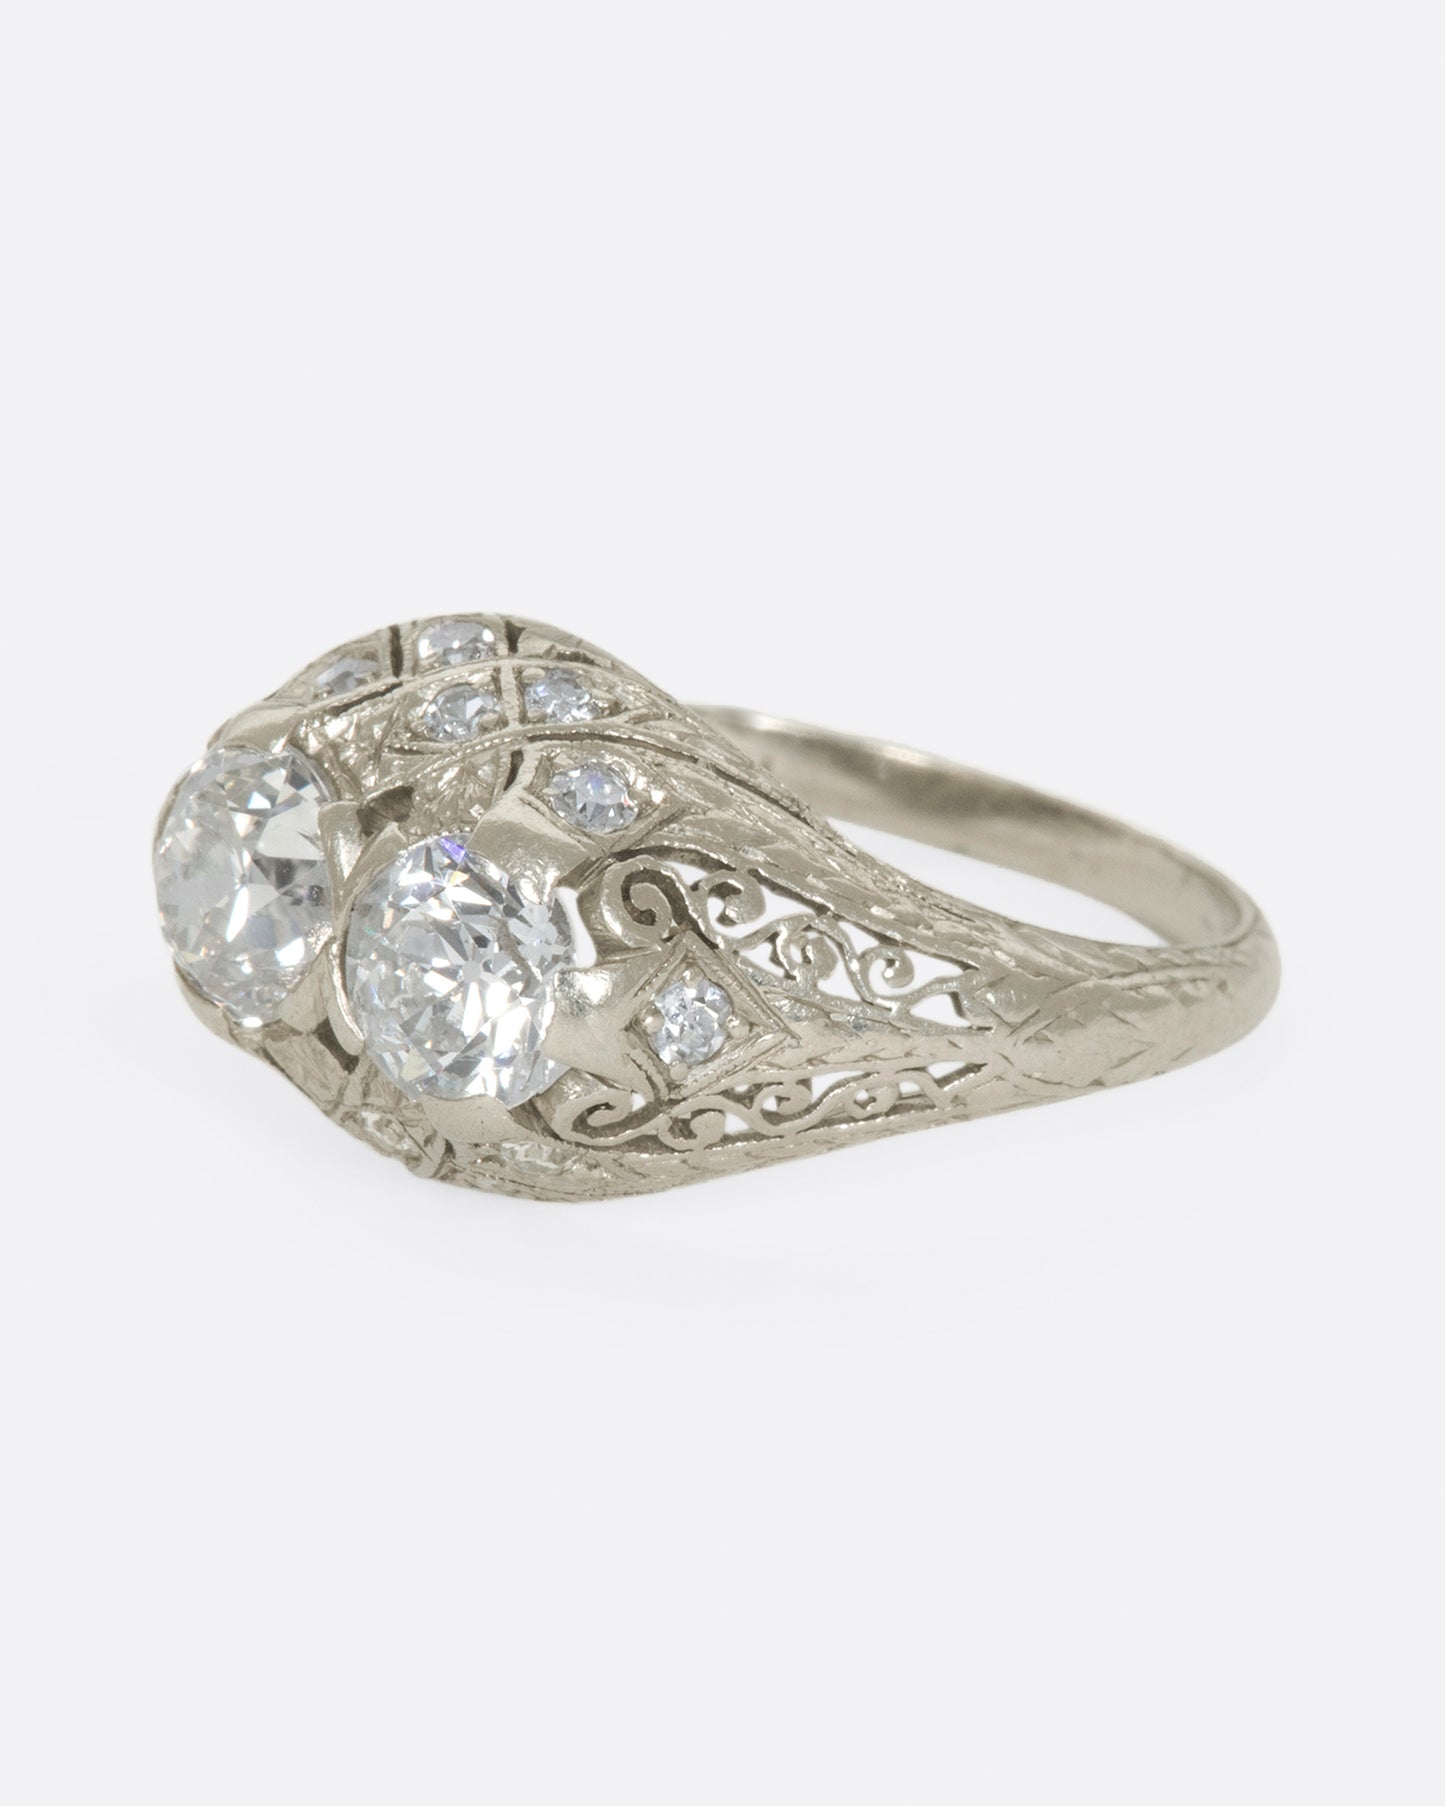 An intricate, sparkling ring to represent "you and me"